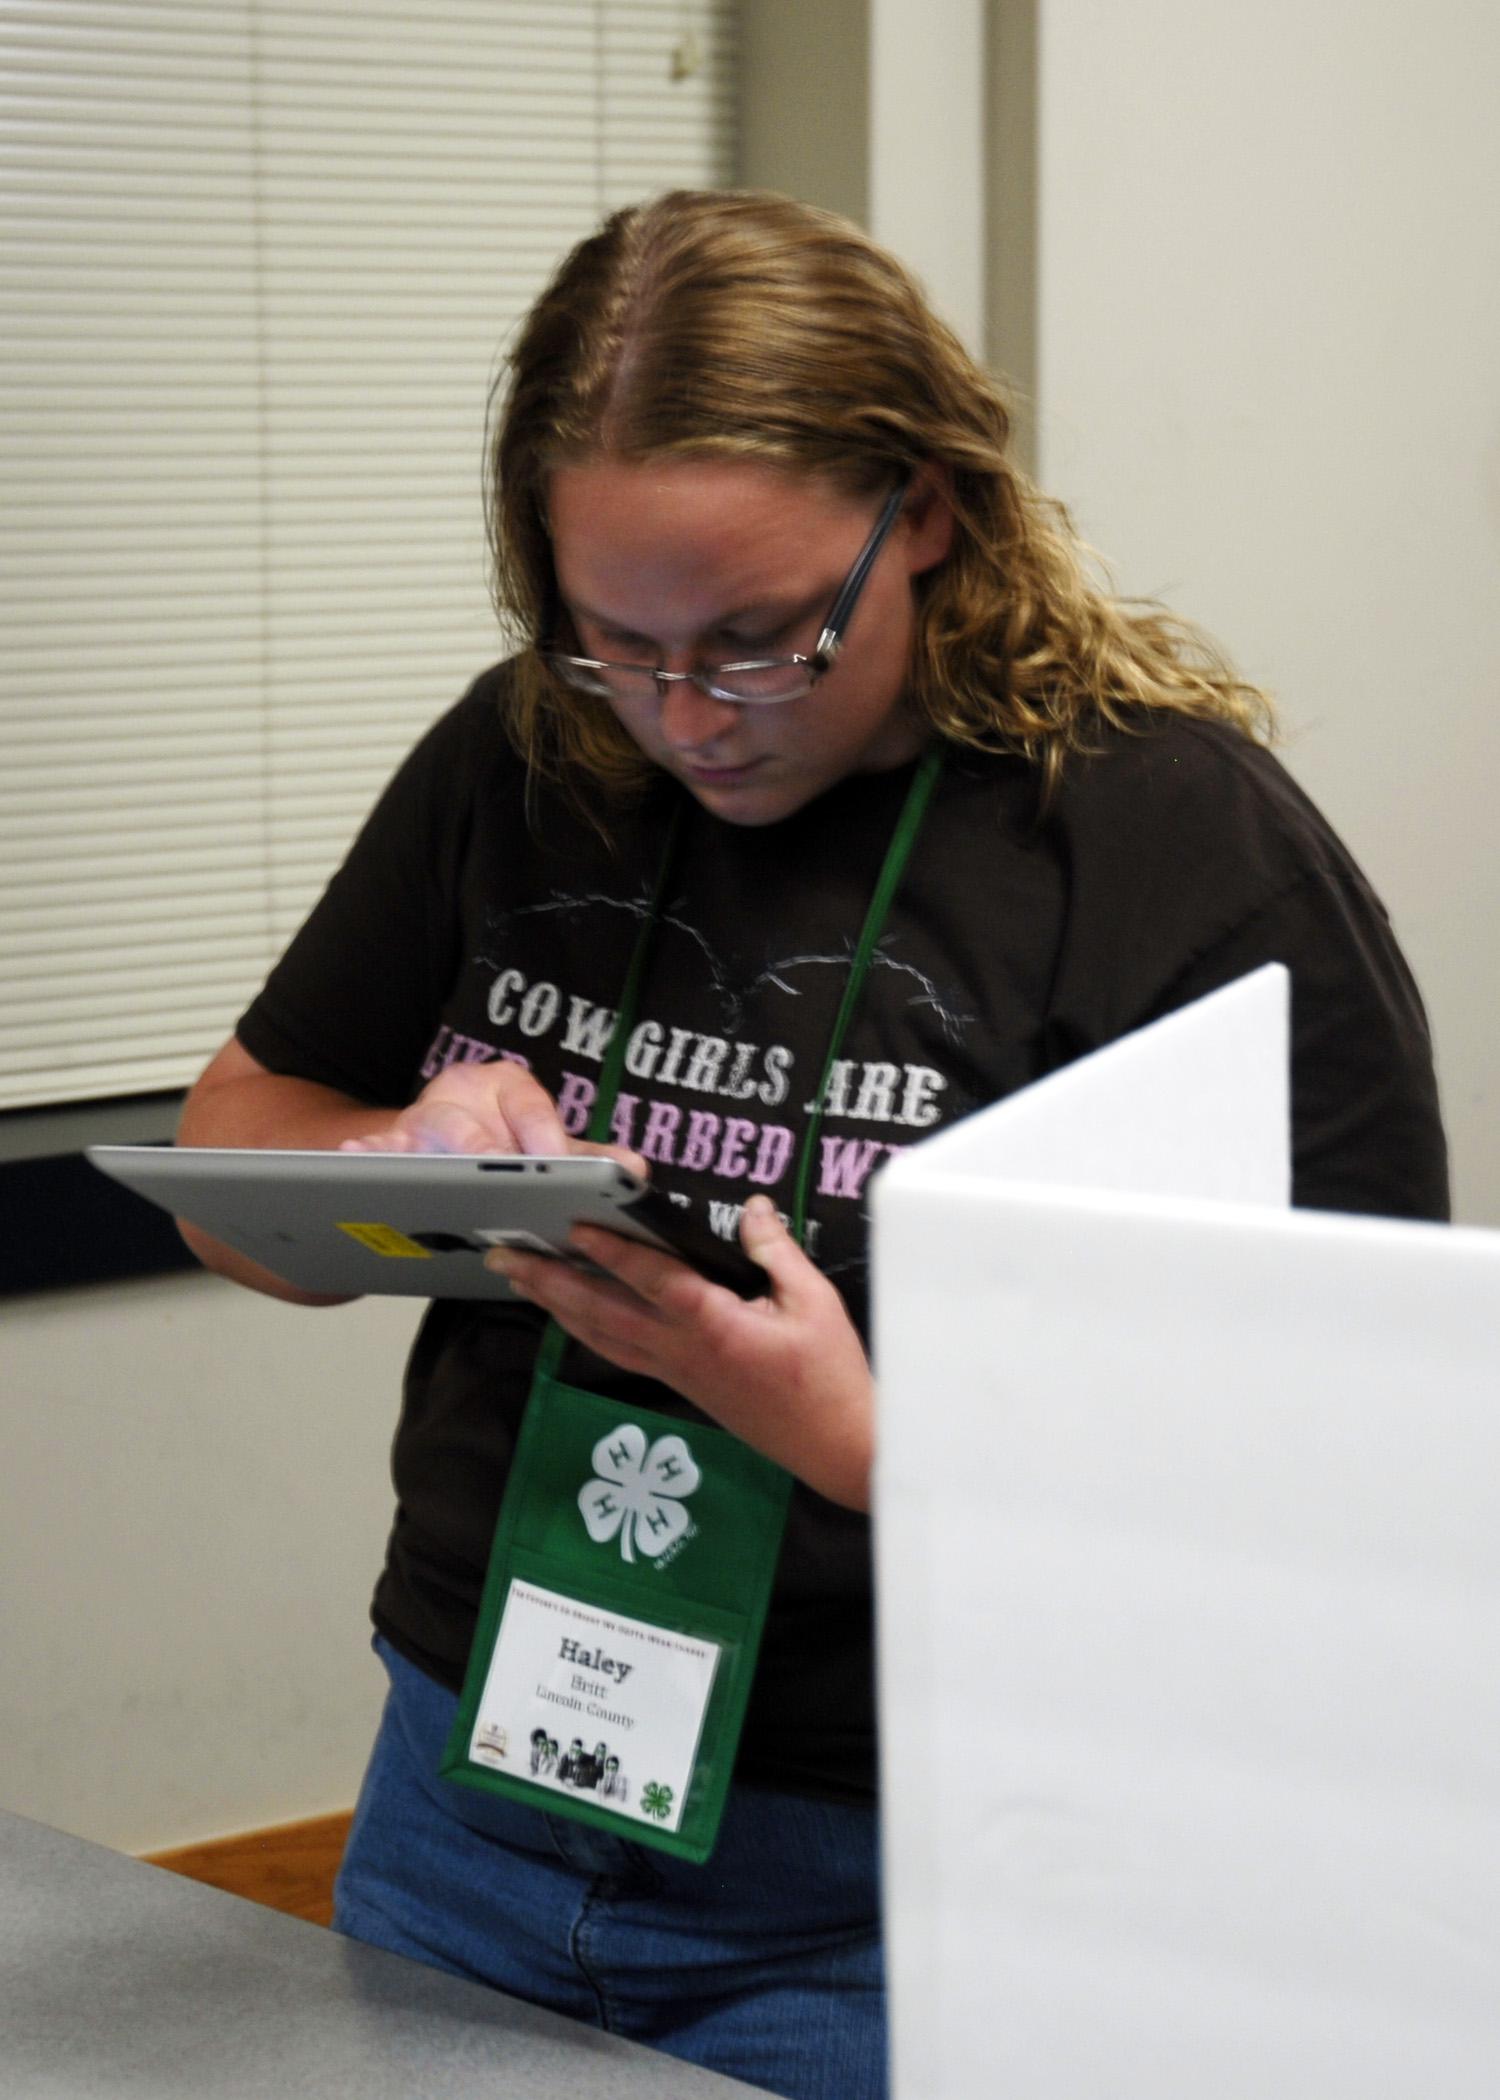 Haley Britt of Lincoln County uses an iPad instead of a paper ballot on May 28, 2014 to vote for State 4-H Council officers during the annual 4-H Club Congress at Mississippi State University. (Photo by MSU Ag Communications/Libby Durst)